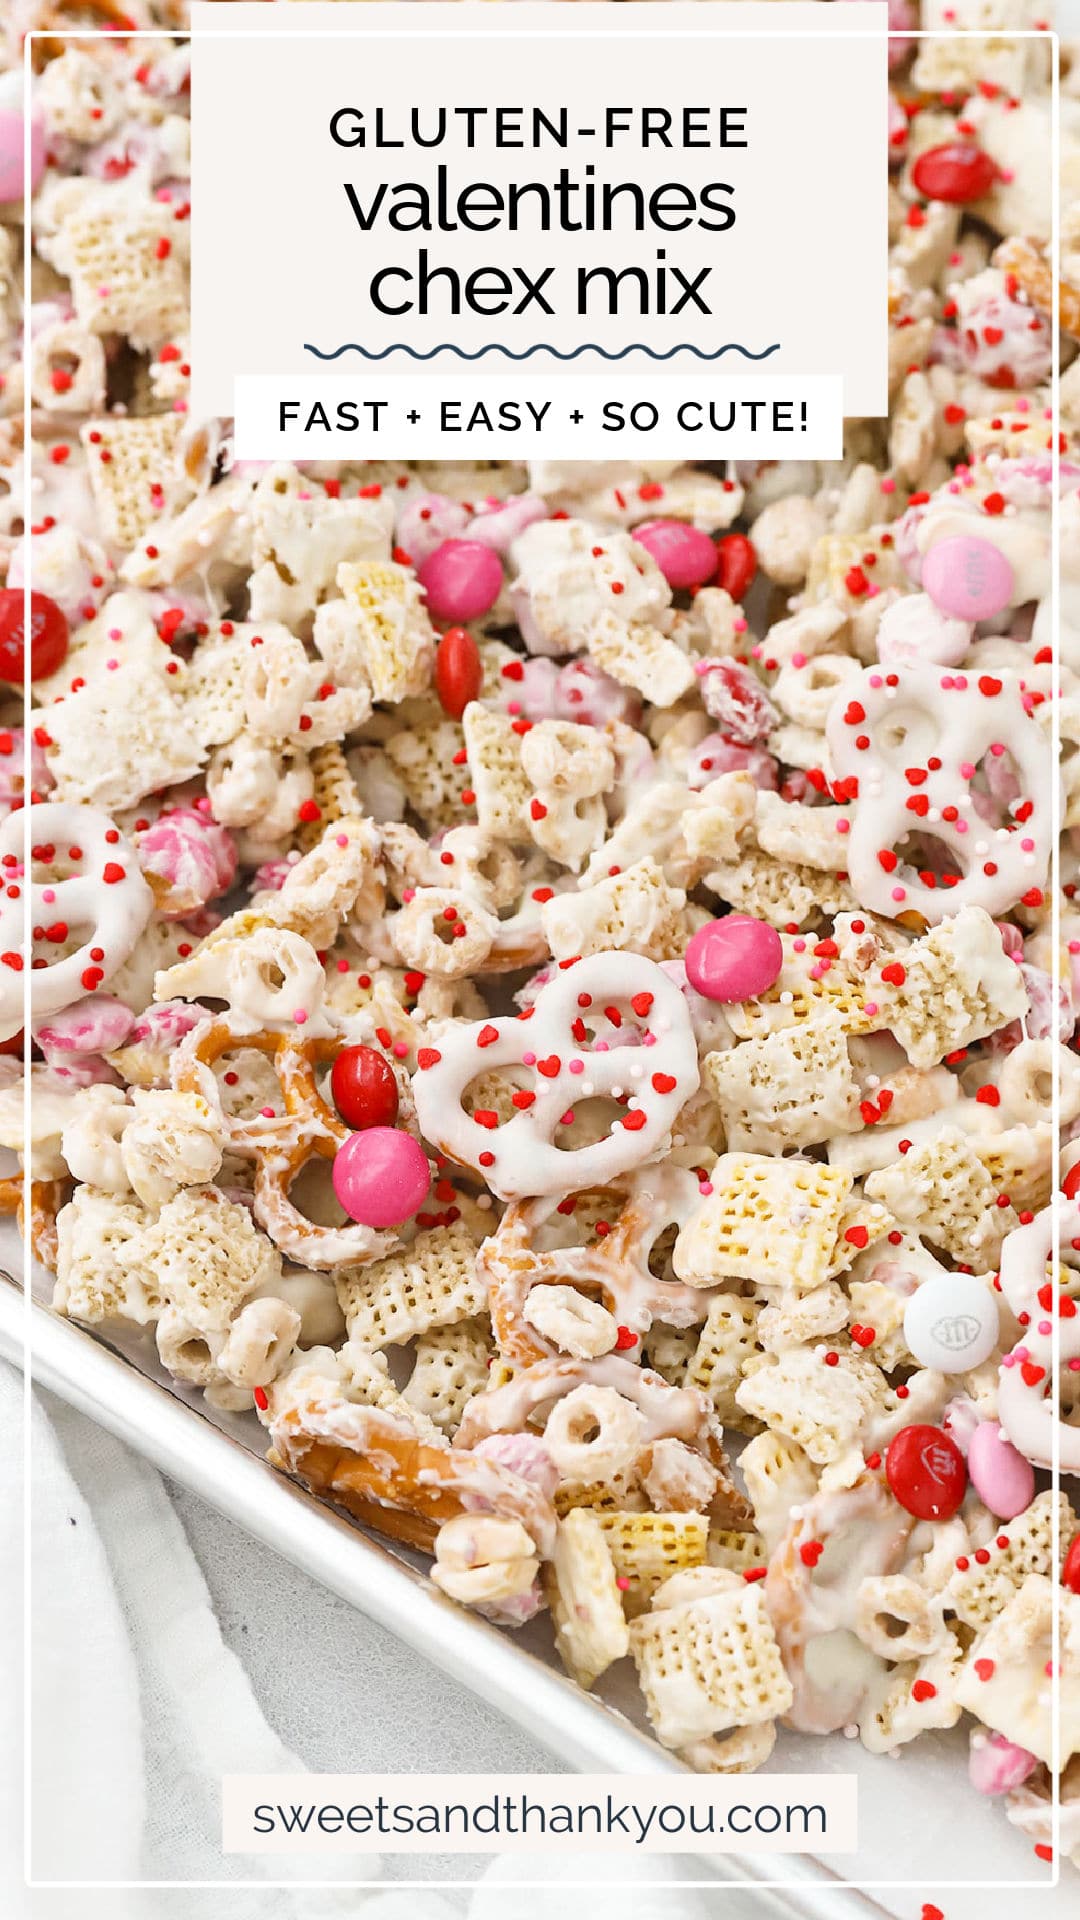 This crispy, crunchy Gluten-Free Valentines Chex Mix recipe is an easy Valentine's treat to share with friends! Don't miss our tips for making it extra pretty. Valentines snack mix / gluten free valentines treat / gluten free valentines snack / gluten free valentines dessert / gluten free valentines recipe / valentines day chex mix / valentines day recipes / gluten-free snack mix / no bake treat / no-bake valentines treat / no-bake valentines dessert